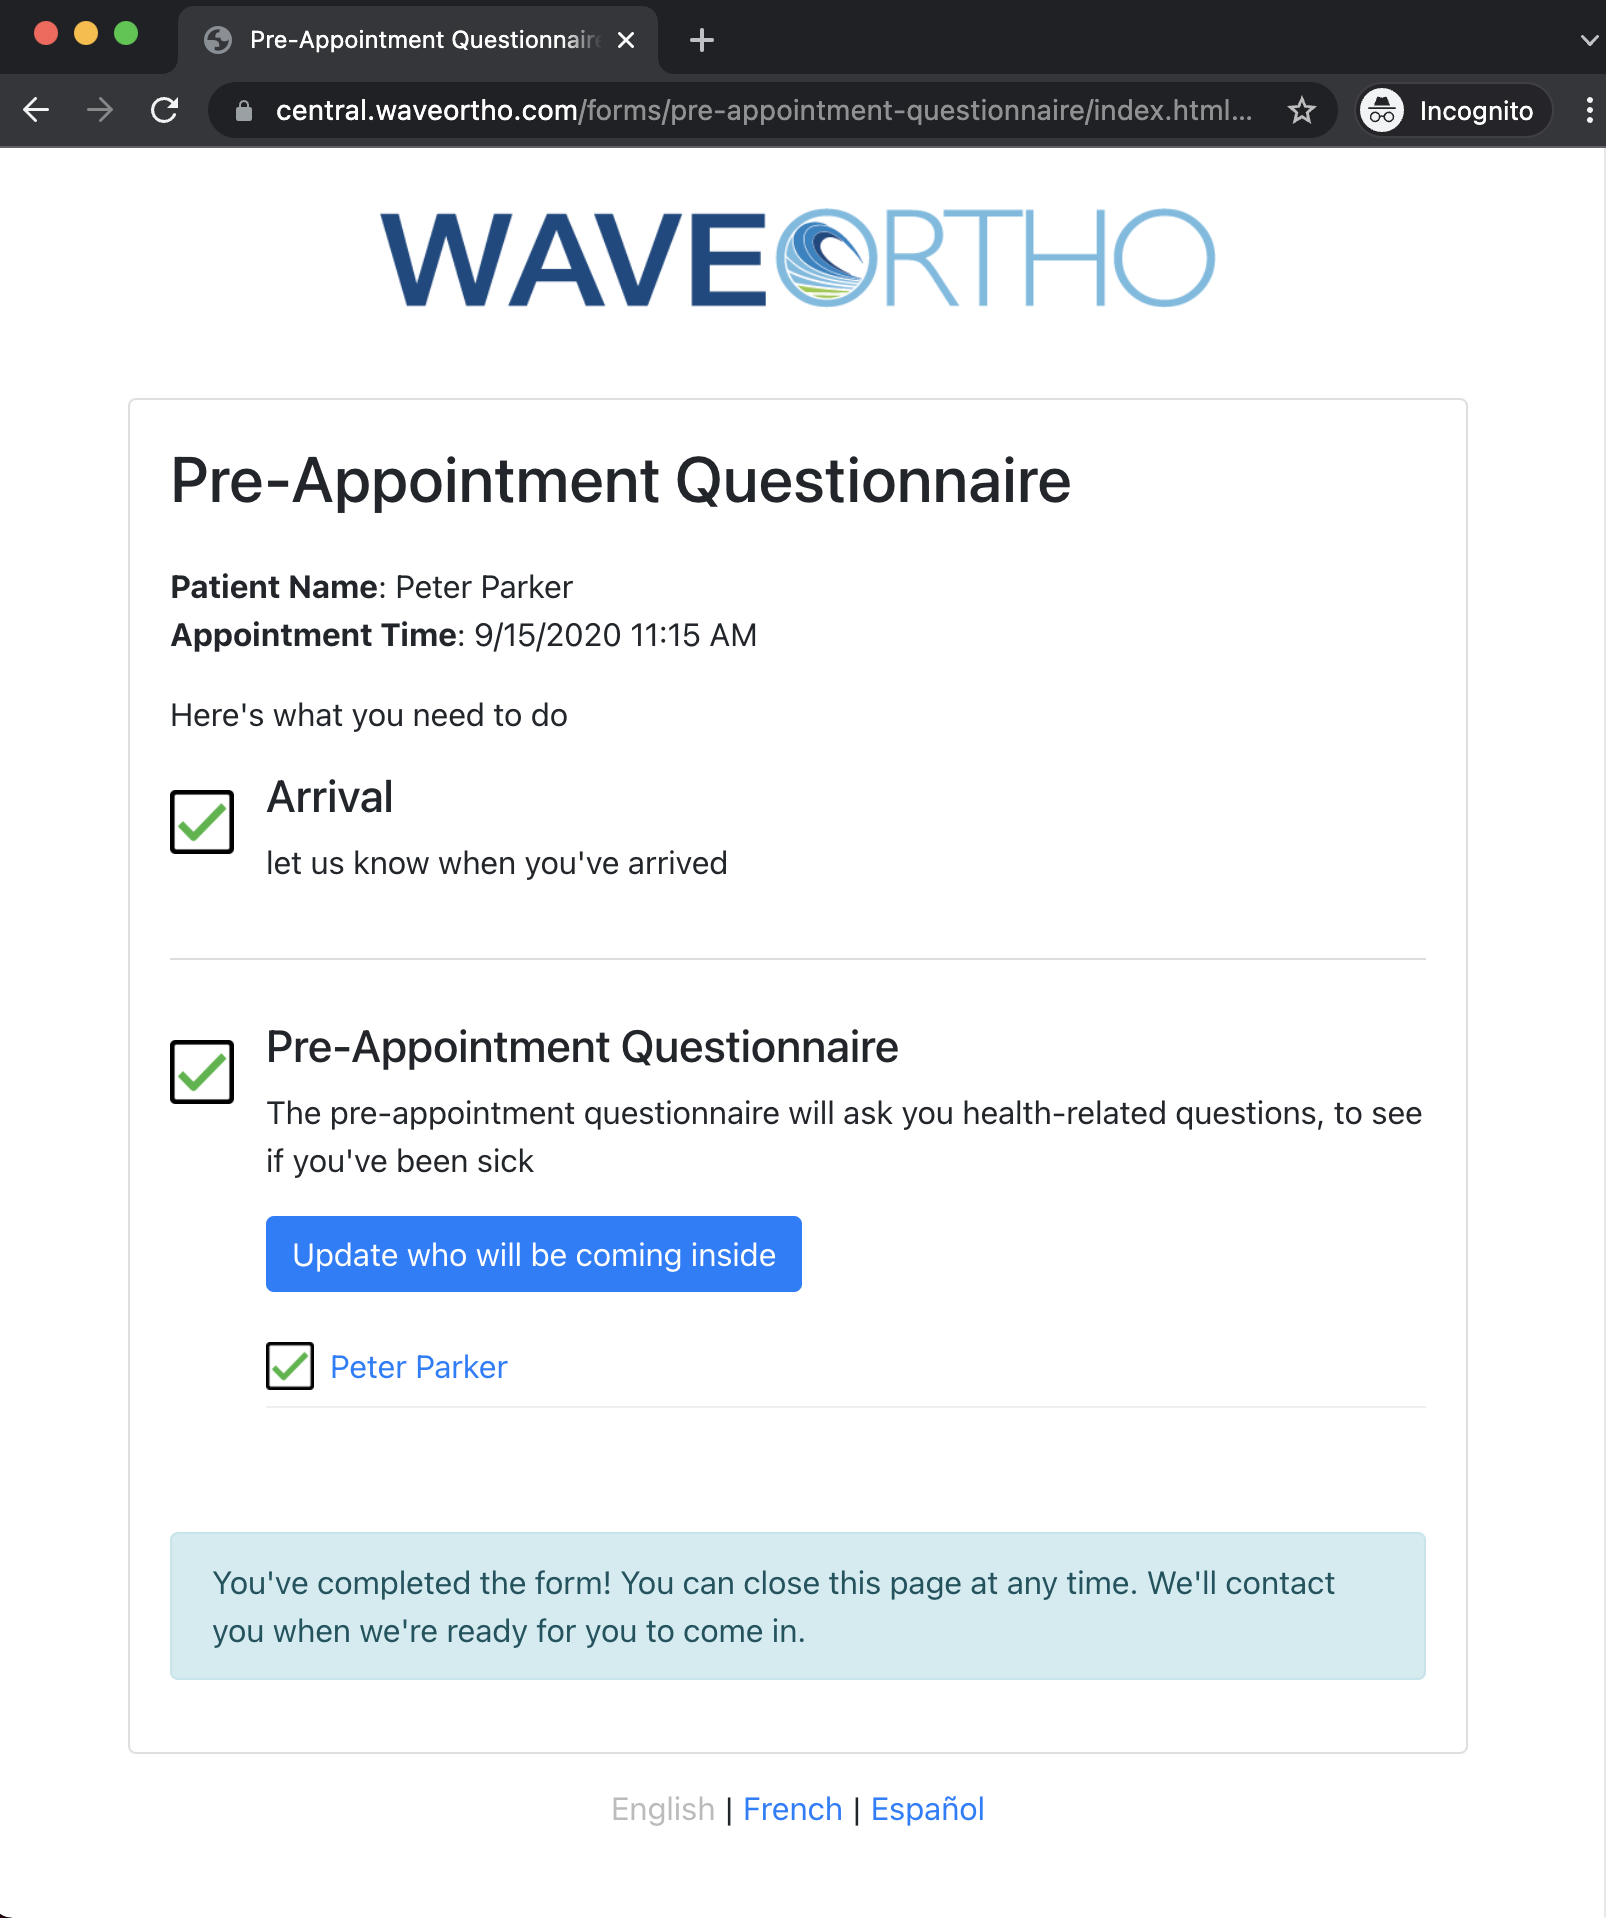 A screenshot of the pre-appointment questionnaire status page, showing an 'Arrival' and 'Pre-Appointment Questionnaire' statuses as 'complete' and ready to arrive at their appointment